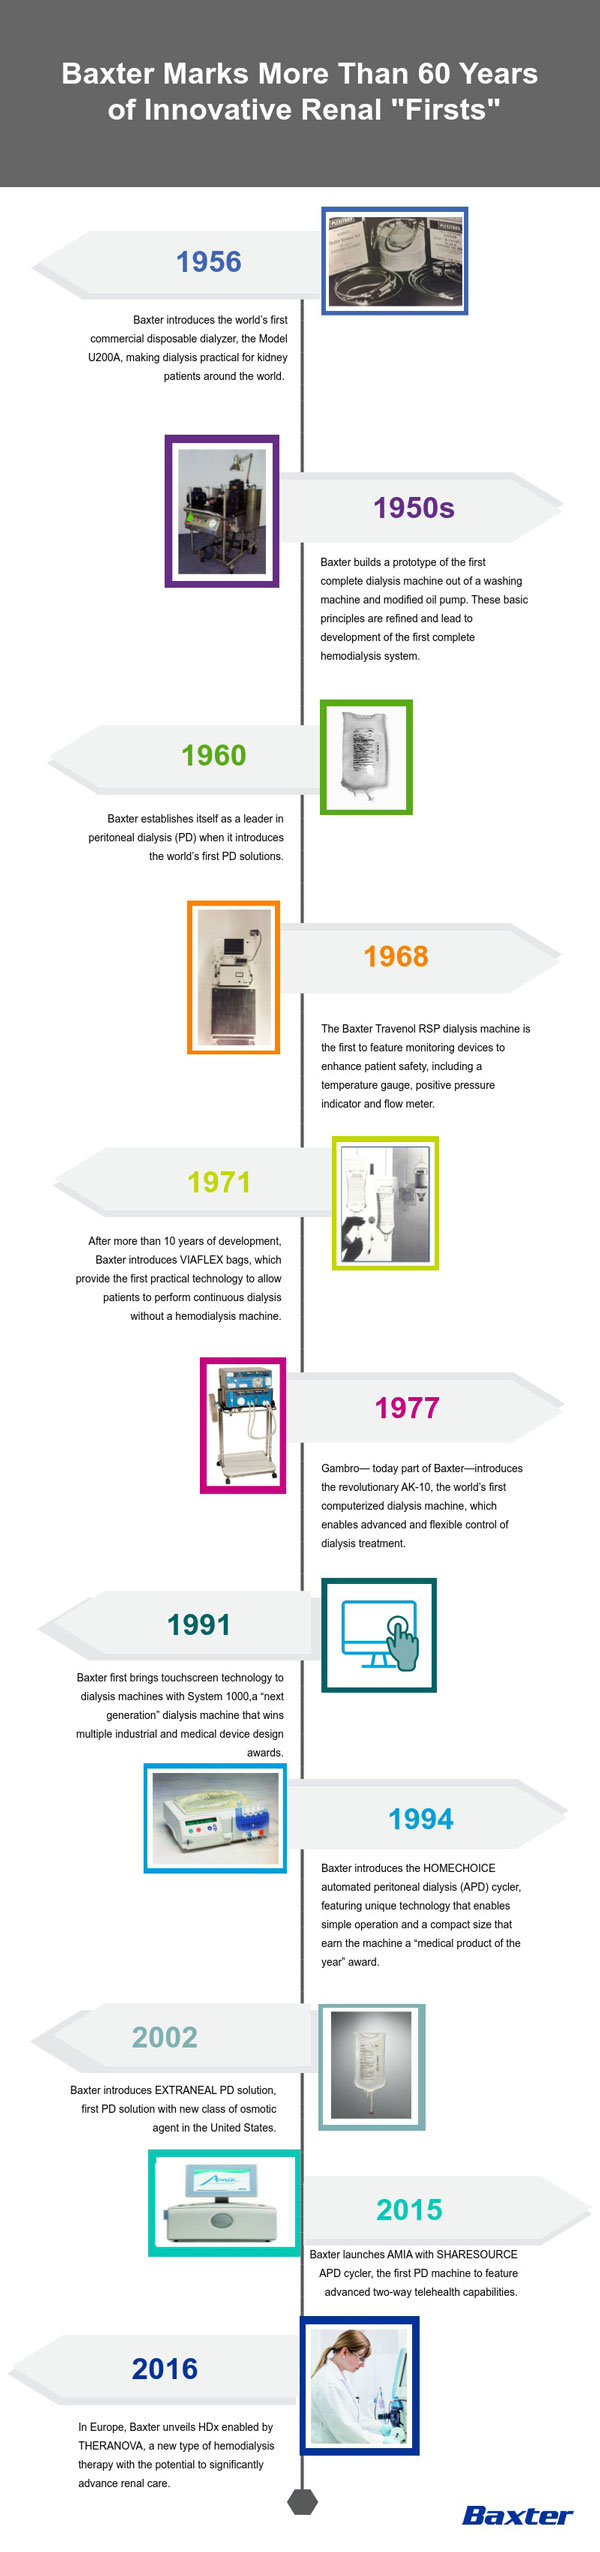 Baxter Marks more than 60 years of Innovative Renal "Firsts"